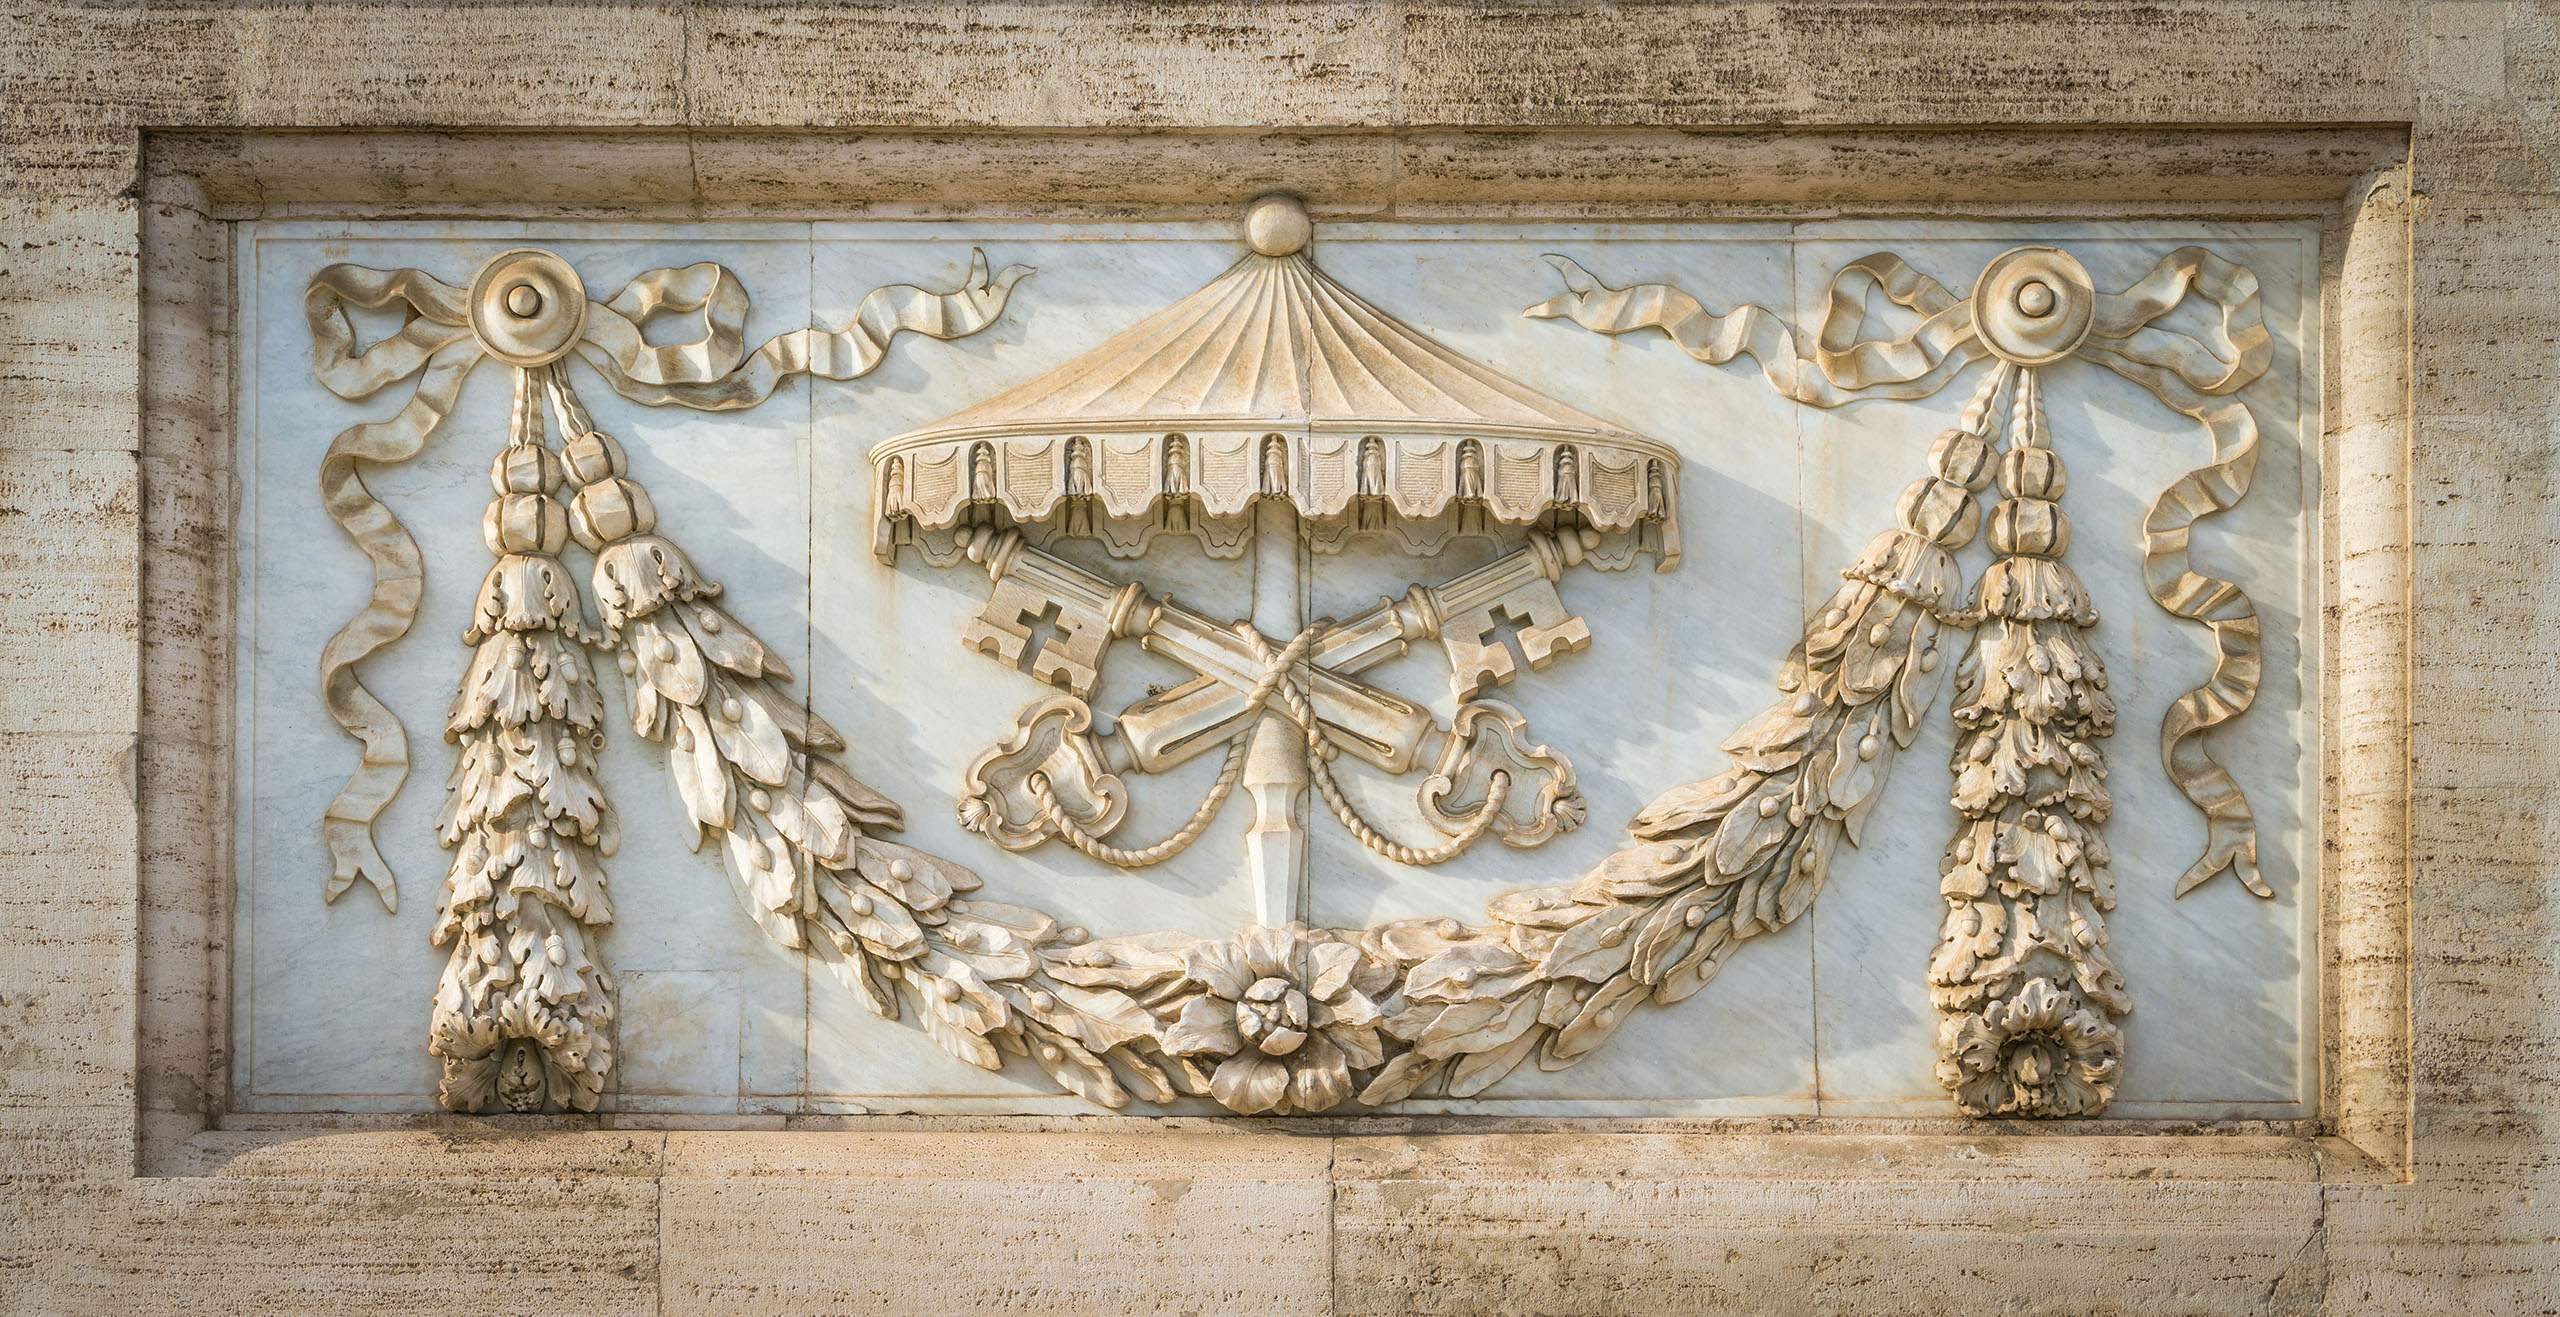 The arms of the Holy See under sede vacante, on the facade of the Basilica of Saint John Lateran in Rome, Italy.